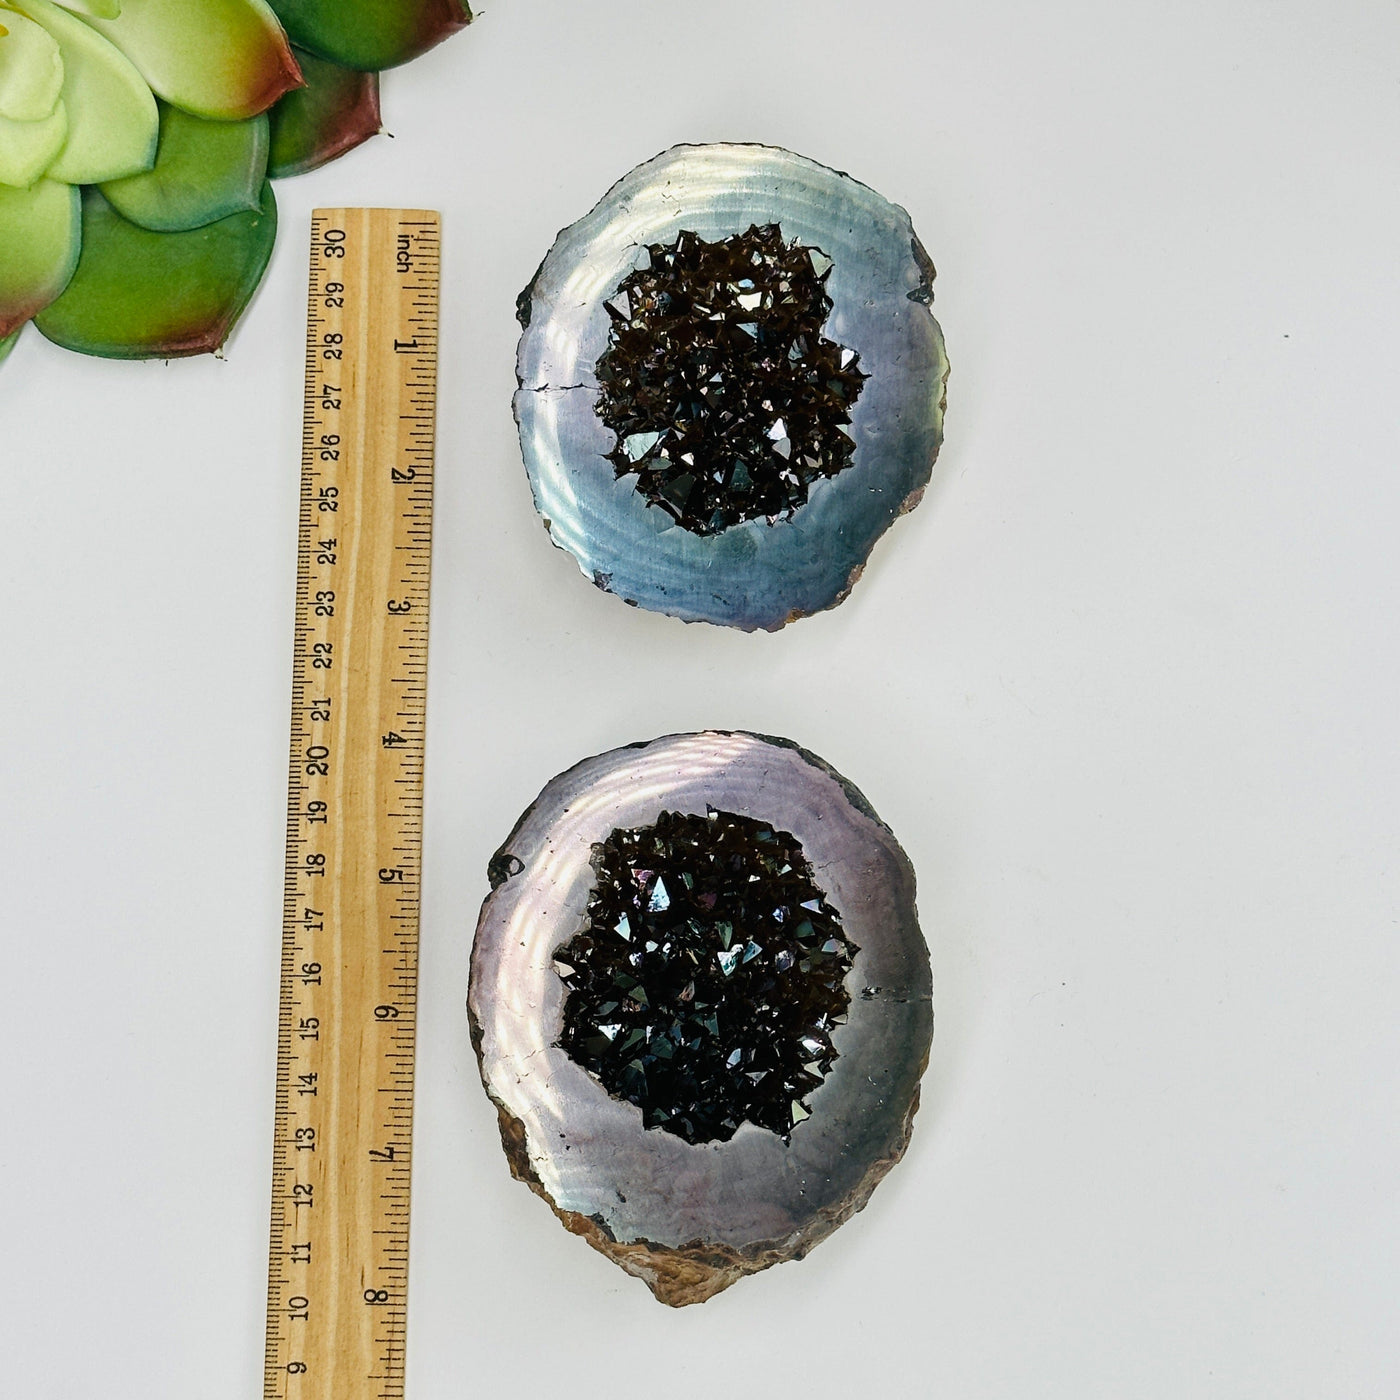 Platinum titanium coated geode box next to a ruler for size reference